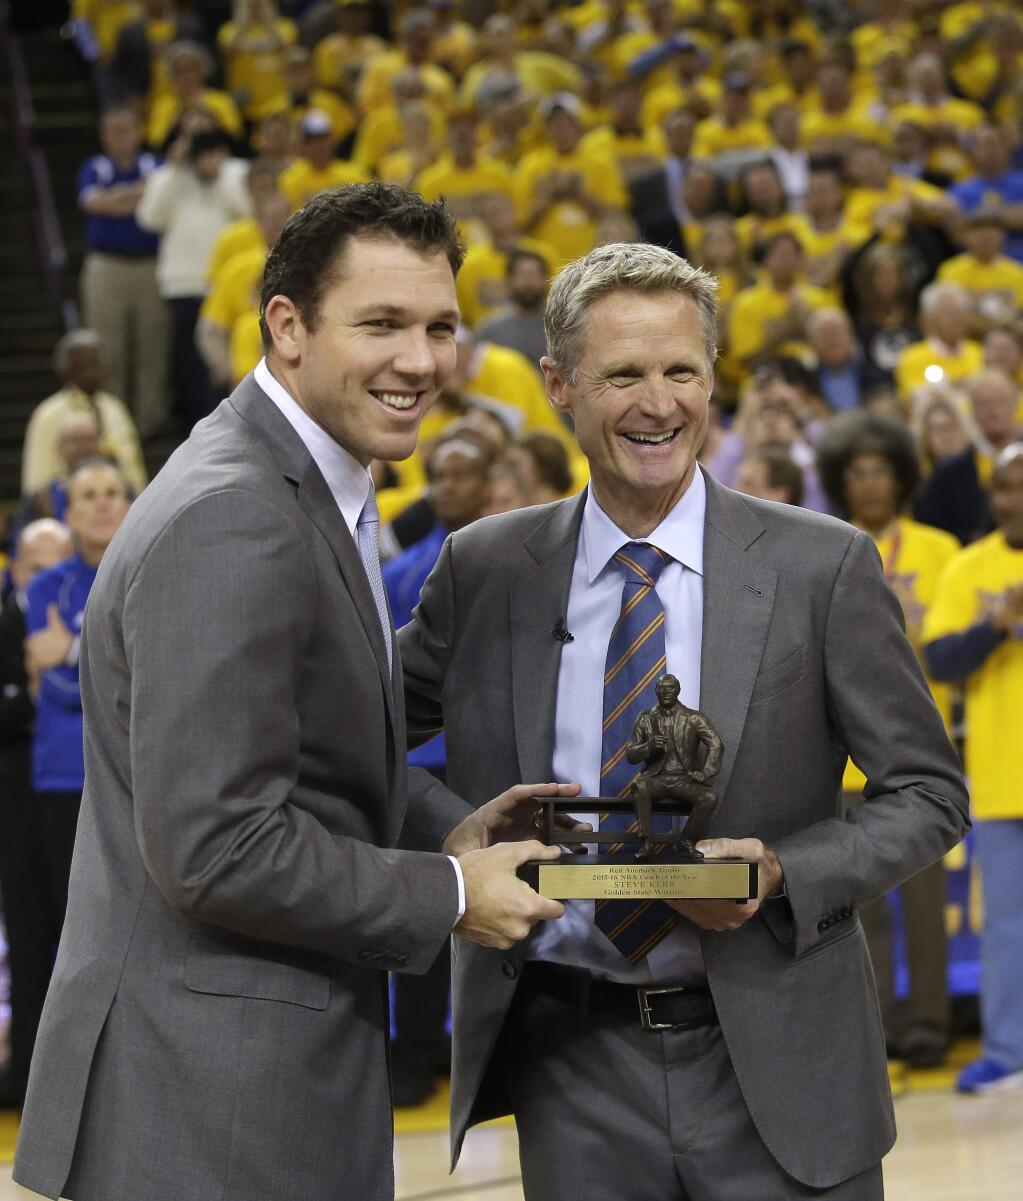 Golden State Warriors head coach Steve Kerr, right, poses for a photo with the league's coach of the year trophy alongside assistant coach Luke Walton before Game 5 of a first-round playoff series Wednesday, April 27, 2016, in Oakland. (AP Photo/Marcio Jose Sanchez)